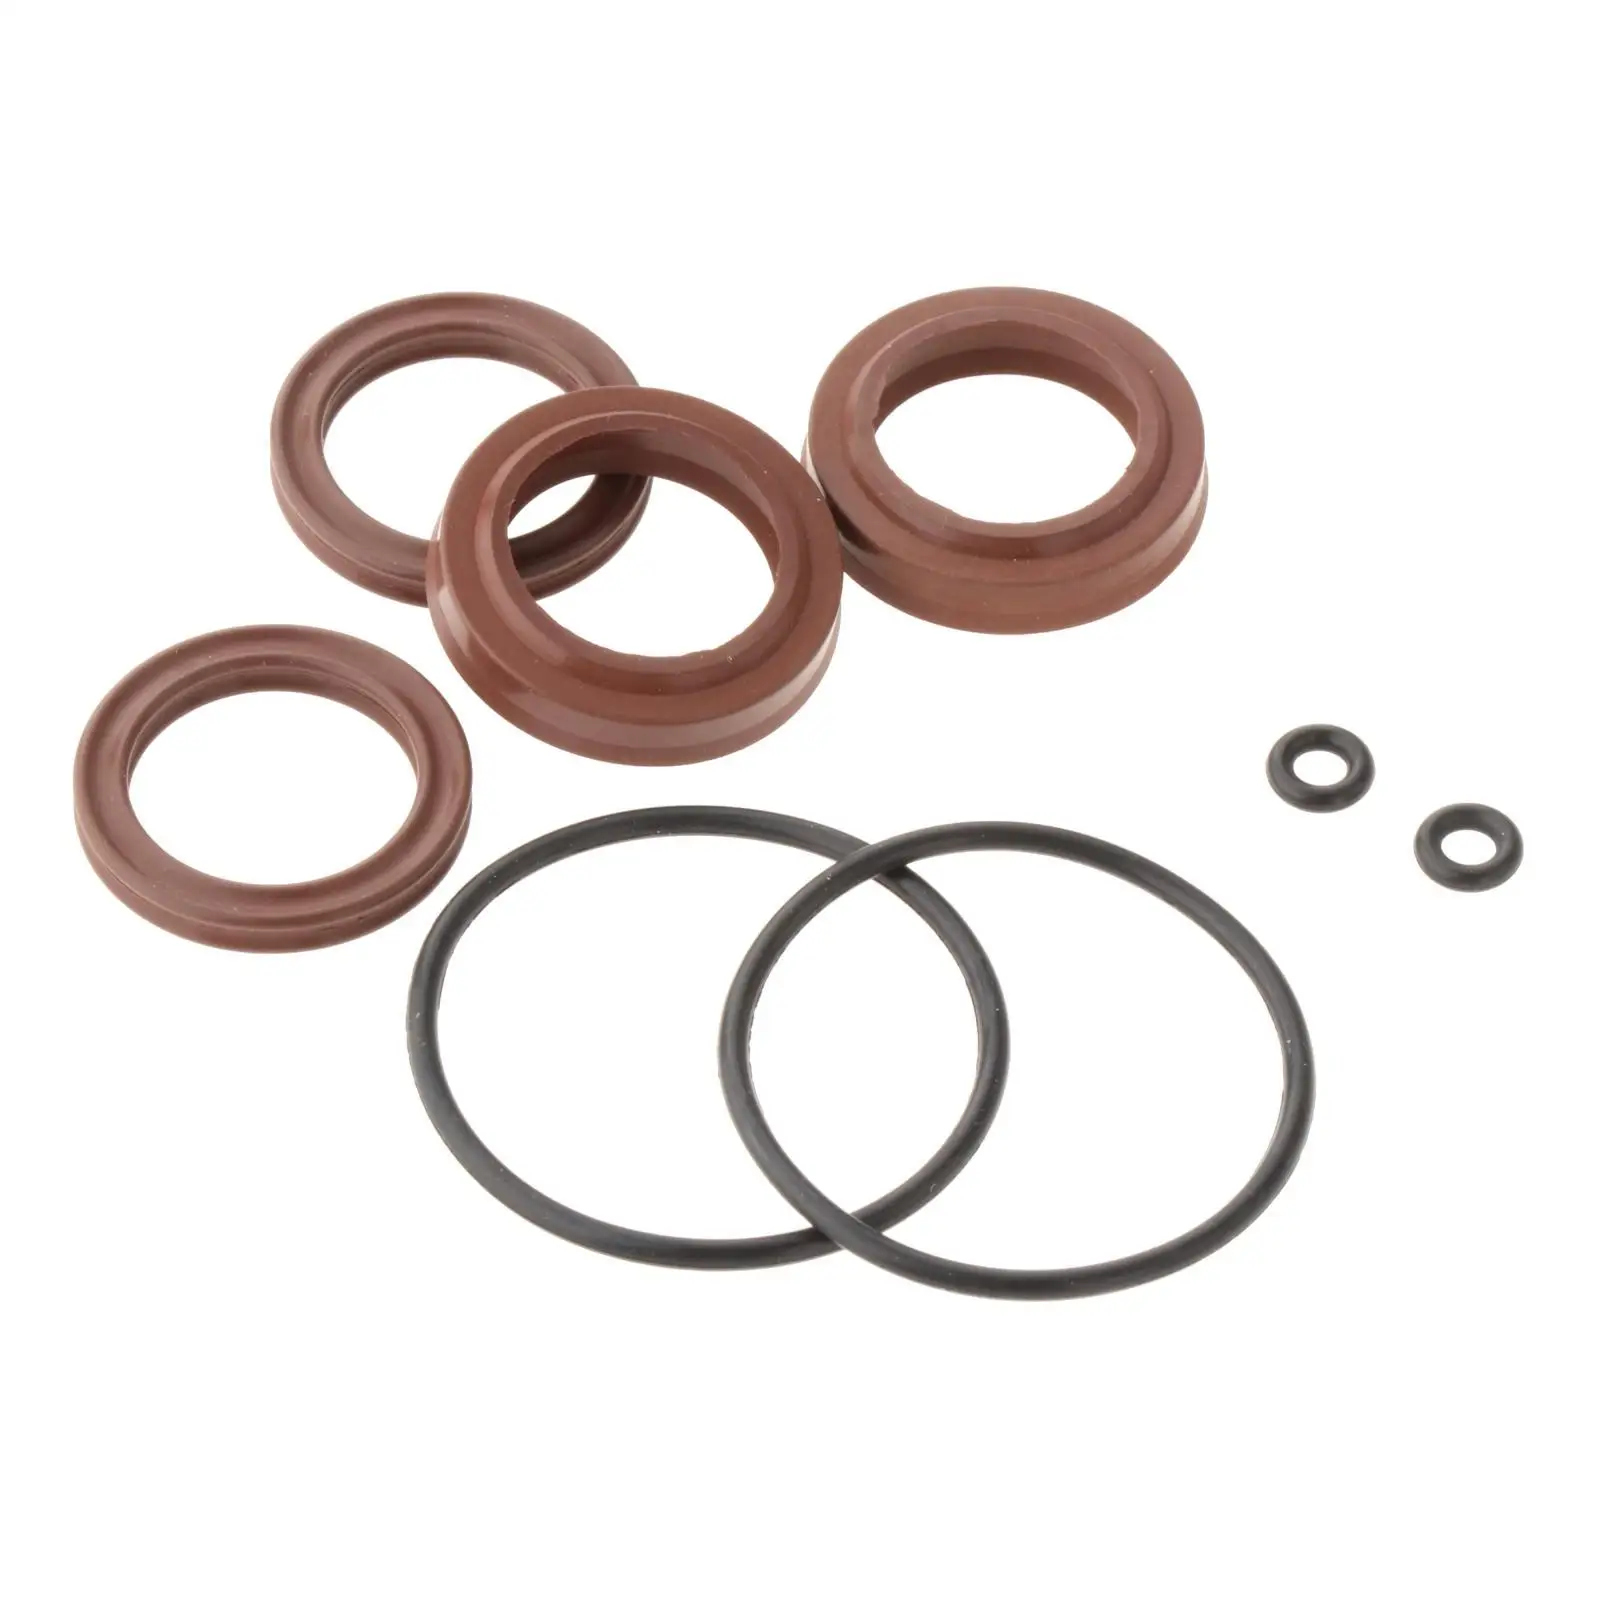 Seastar Steering Cylinder replacement seal kit HC5345+Others FSM051